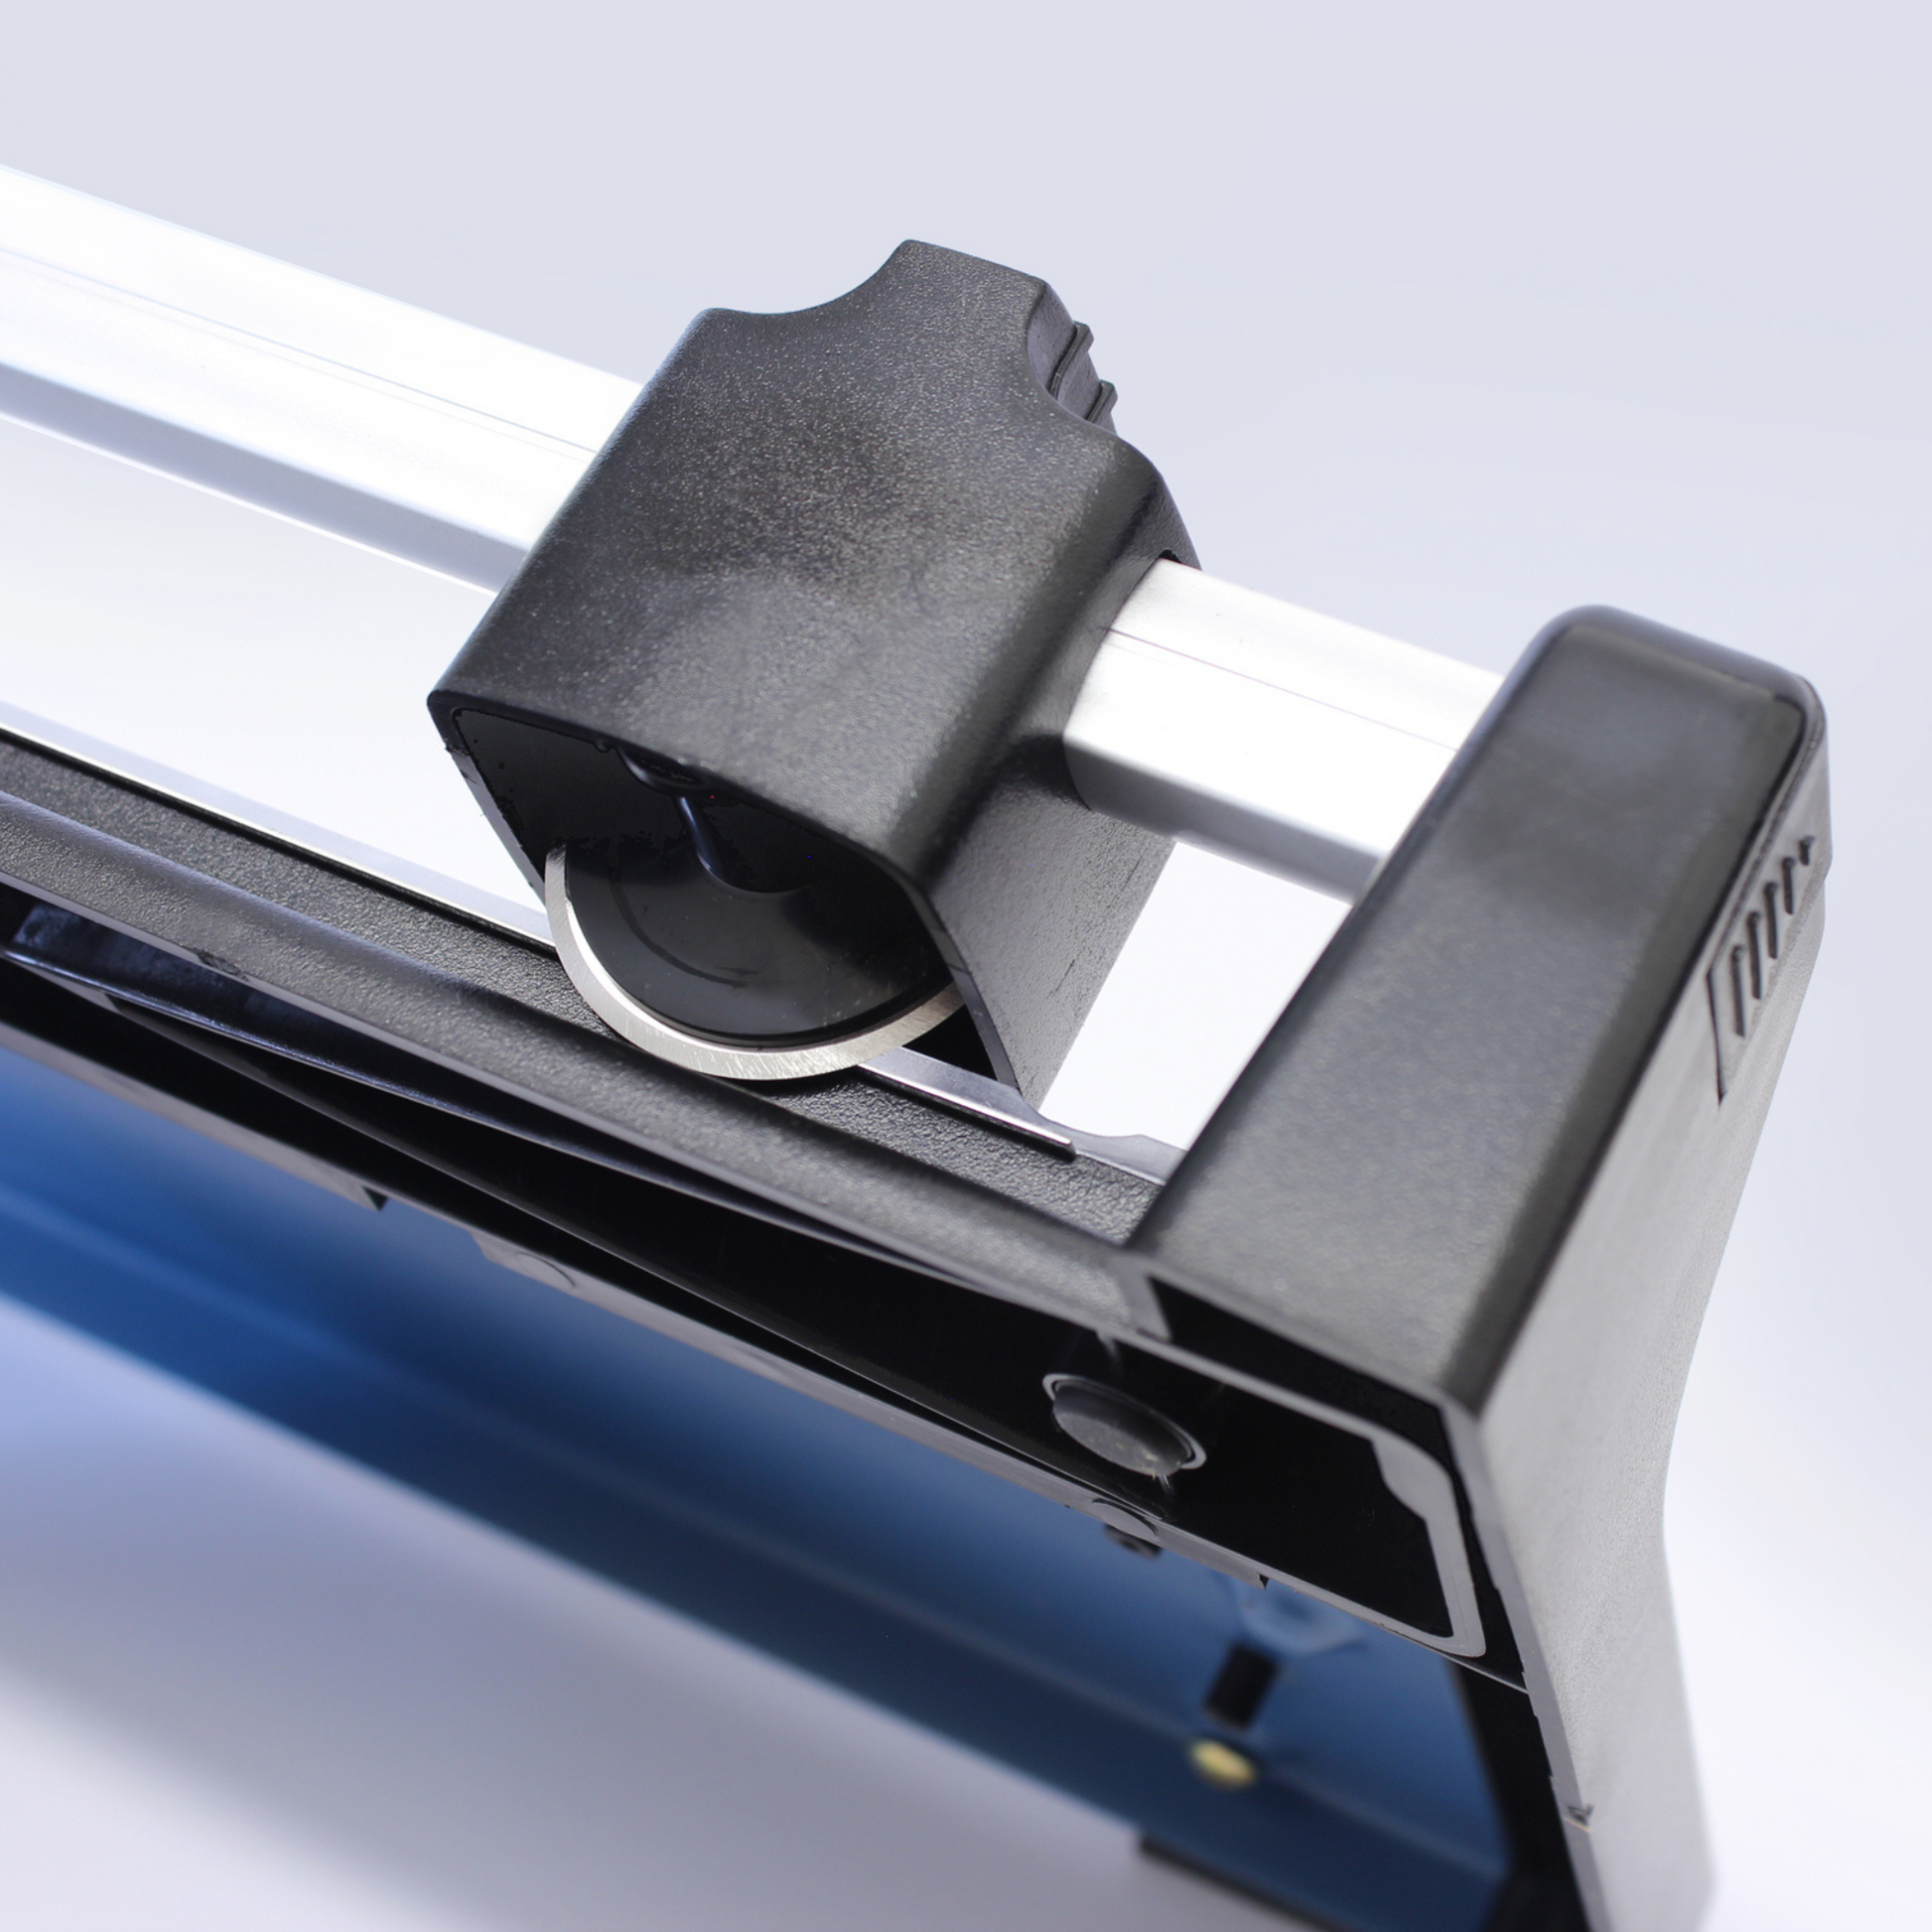 A close view of the cutting head on an A3 rotary paper trimmer, featuring a textured black handle for a secure grip and the round blade that ensures clean cuts, with a glimpse of the blue metal base for stability.